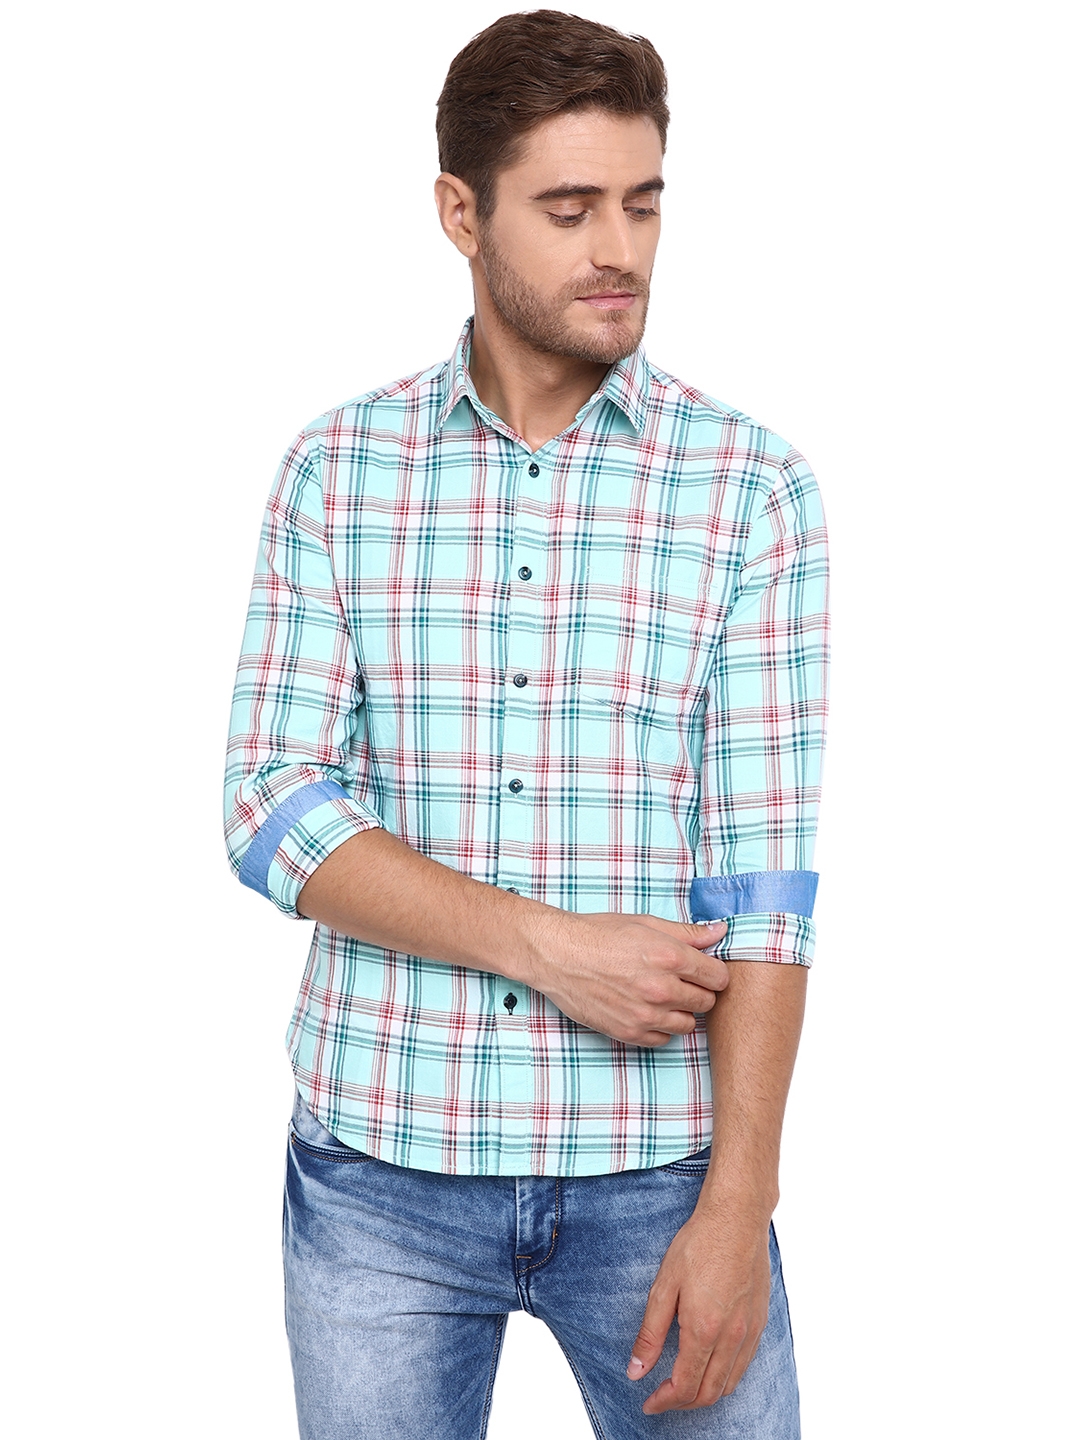 Greenfibre | Sky Blue Checked Slim Fit Casual Shirt | Greenfibre 0